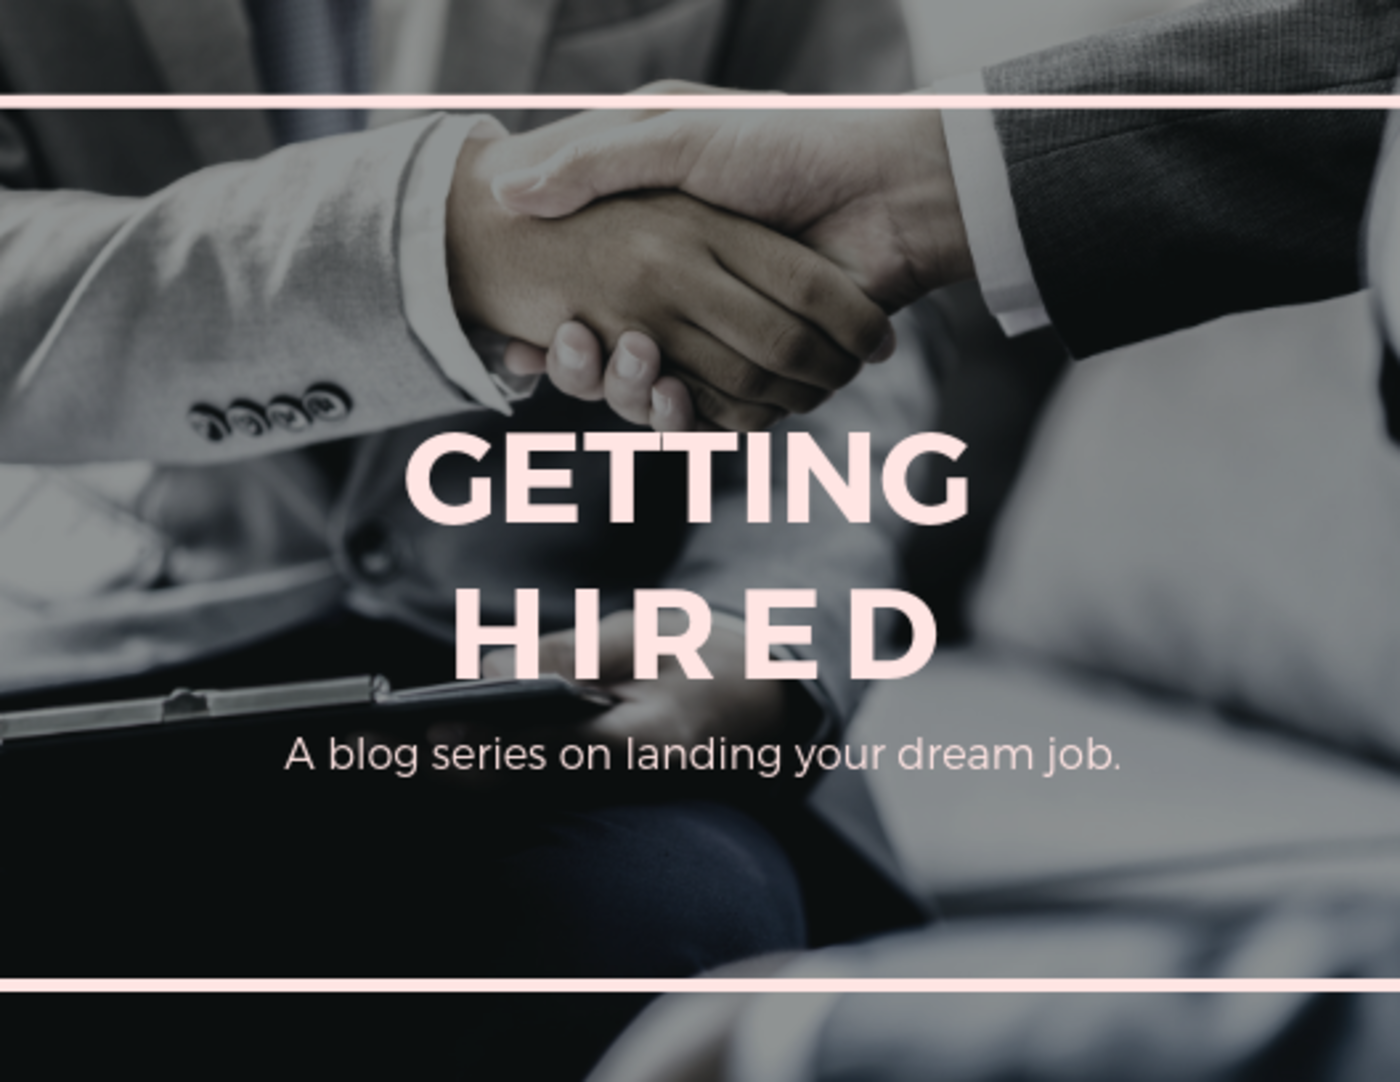 getting hired blog series with 2 people shaking hands